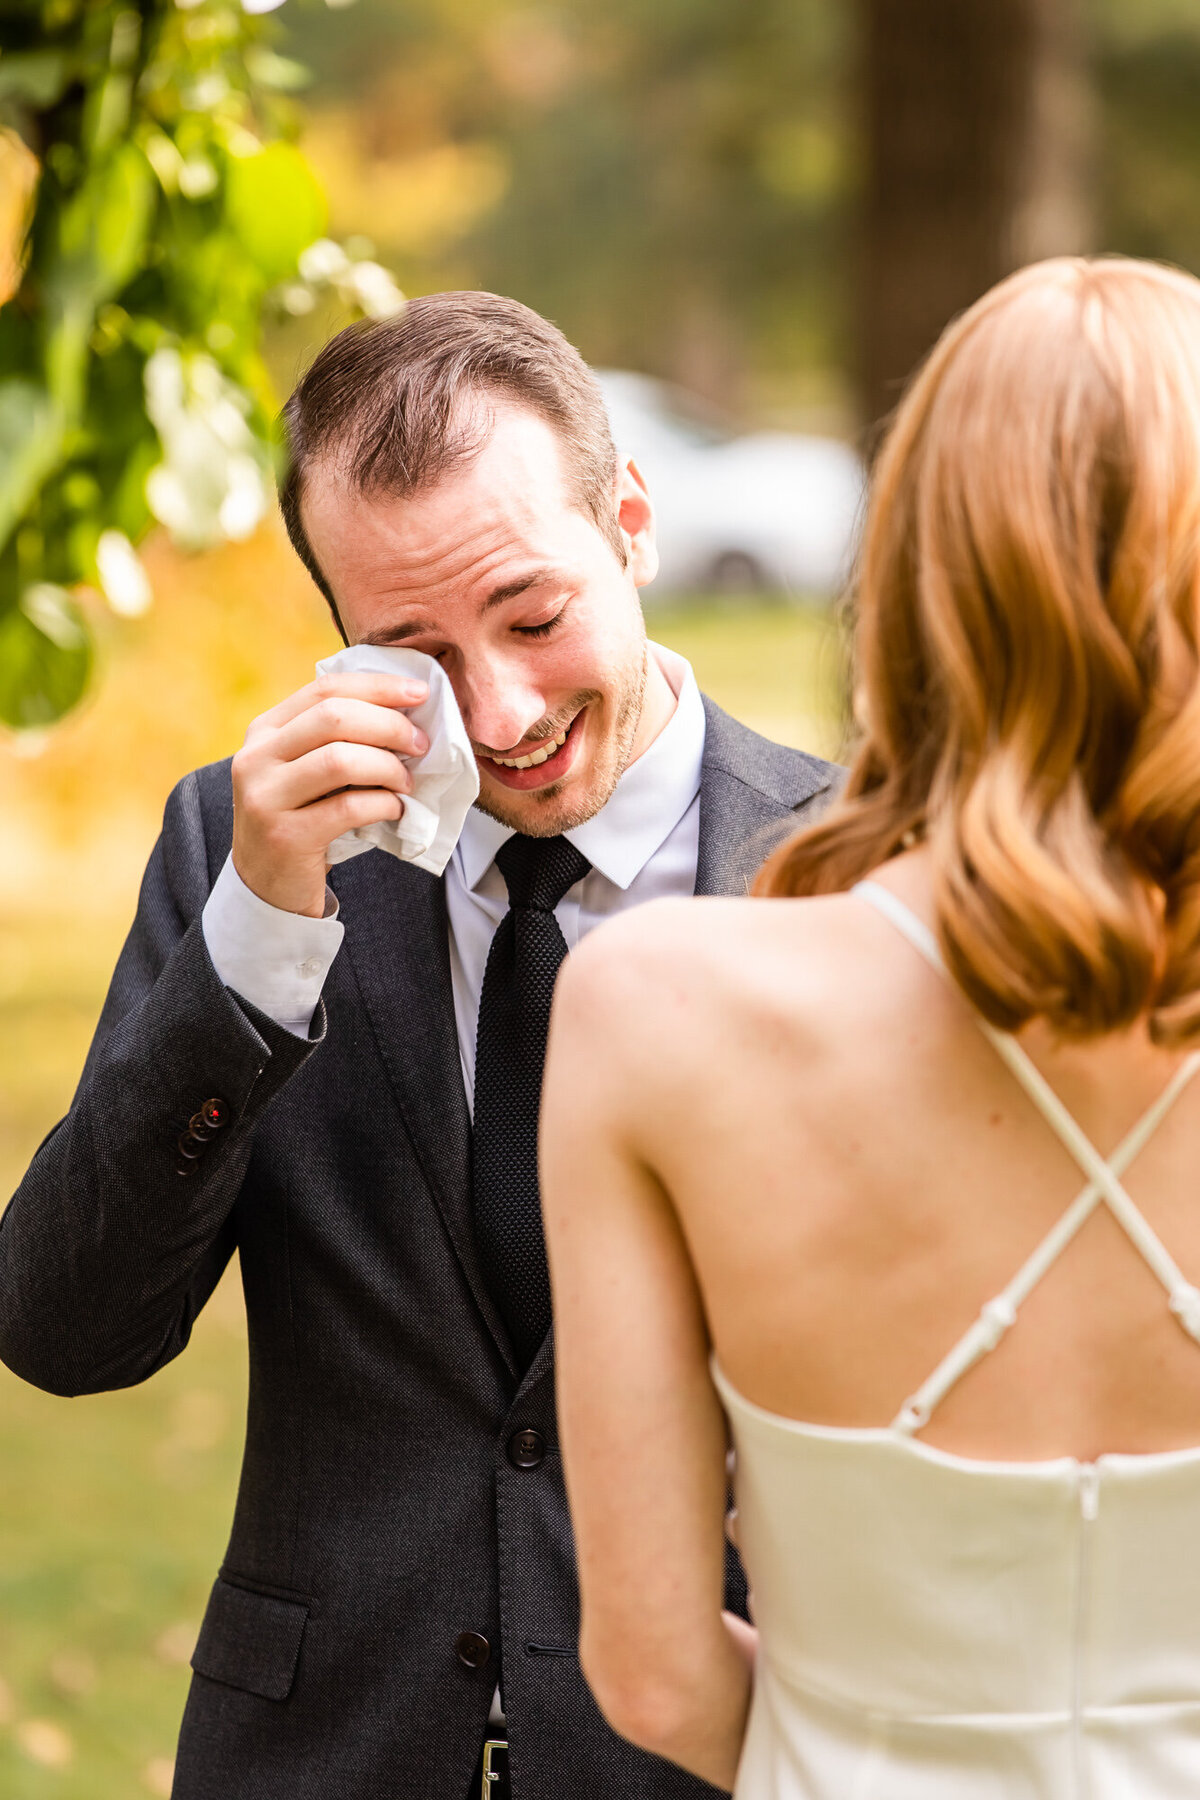 Groom crying during wedding vows at his outdoor intimate wedding ceremony